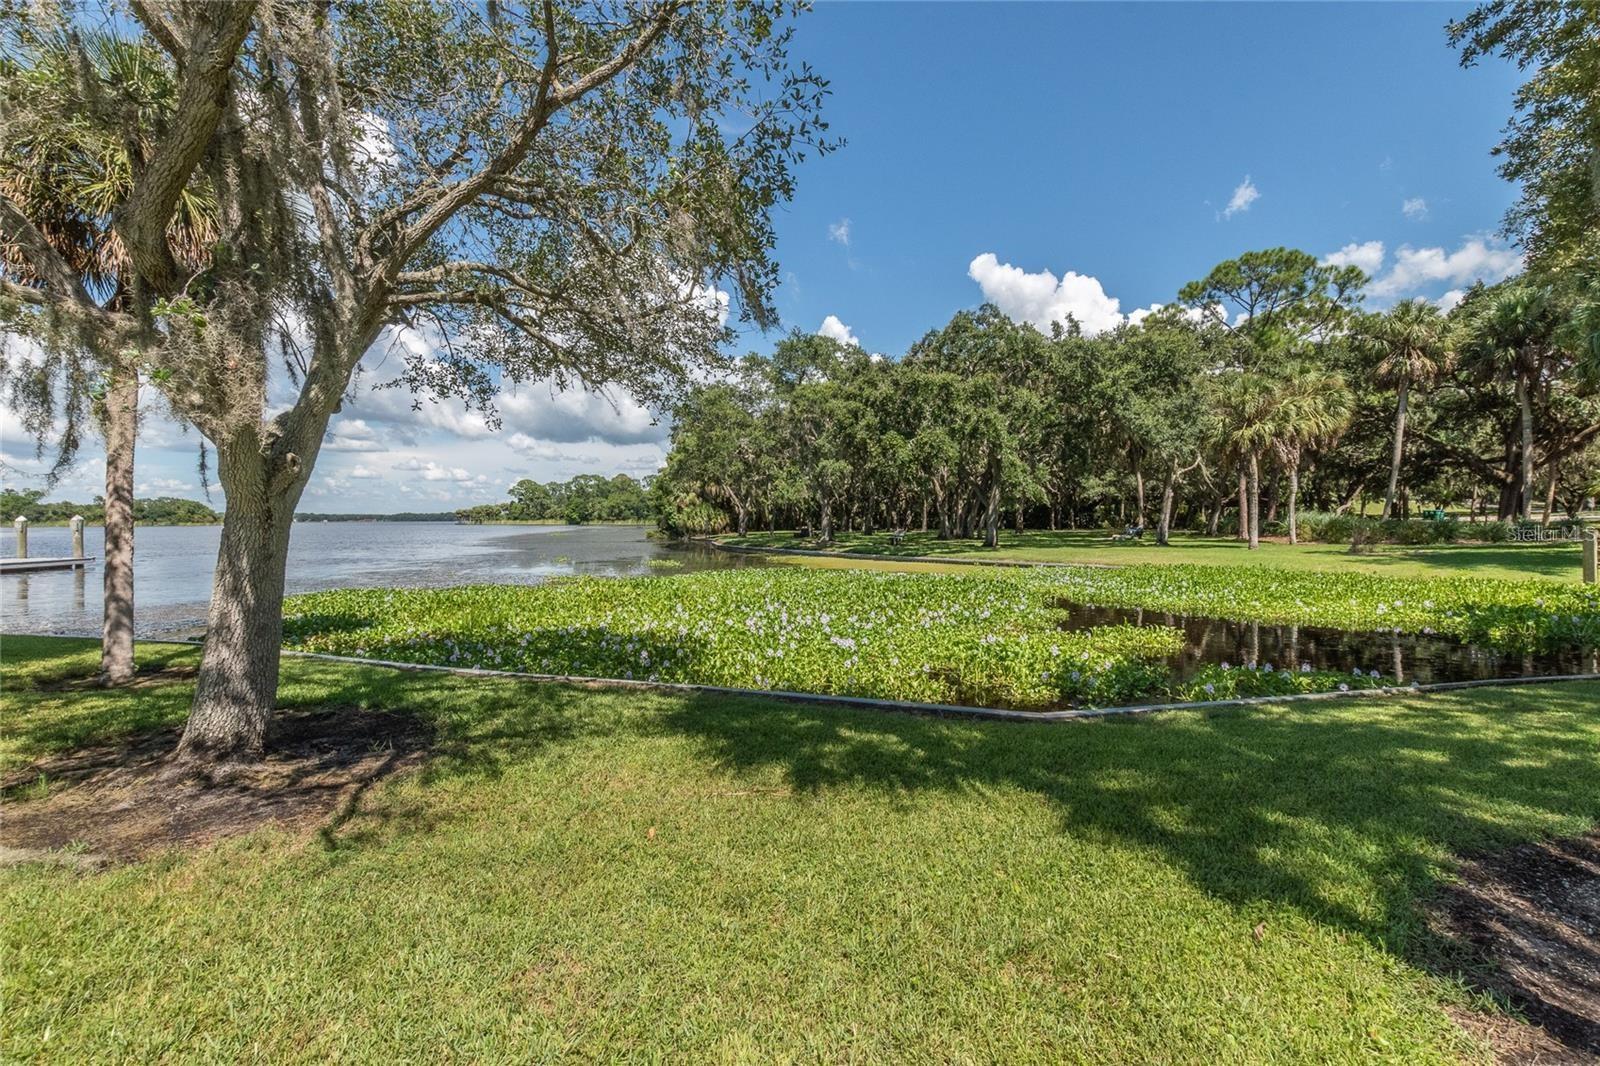 Area at the Anderson on the 9 mile long sking and fishing Tarpon Lake.